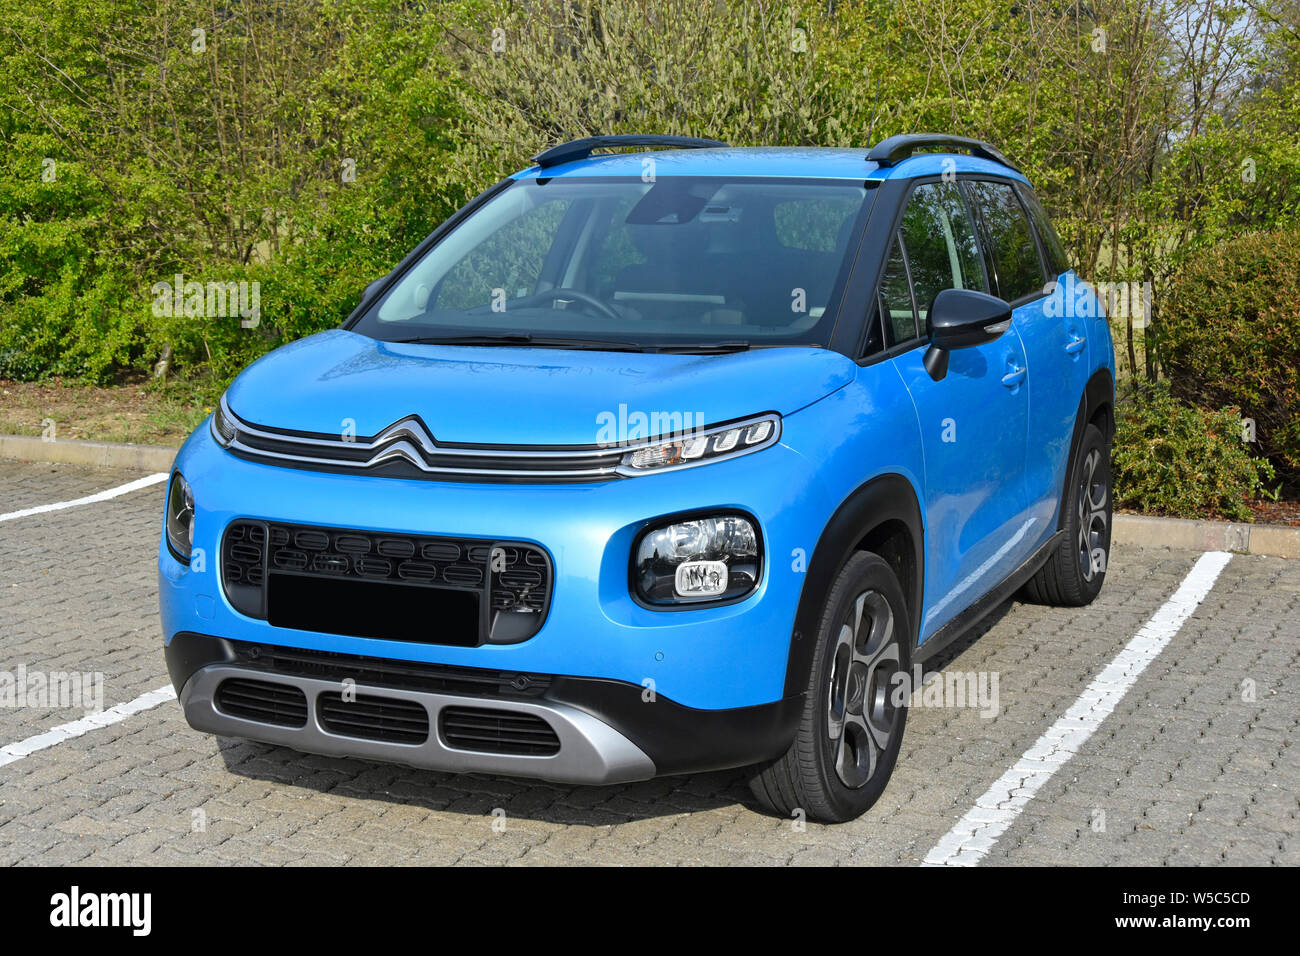 5 door right hand drive hatchback automobile family car front view of new 2019 blue Citroen C3 Aircross mini SUV Flair variant with petrol engine UK Stock Photo